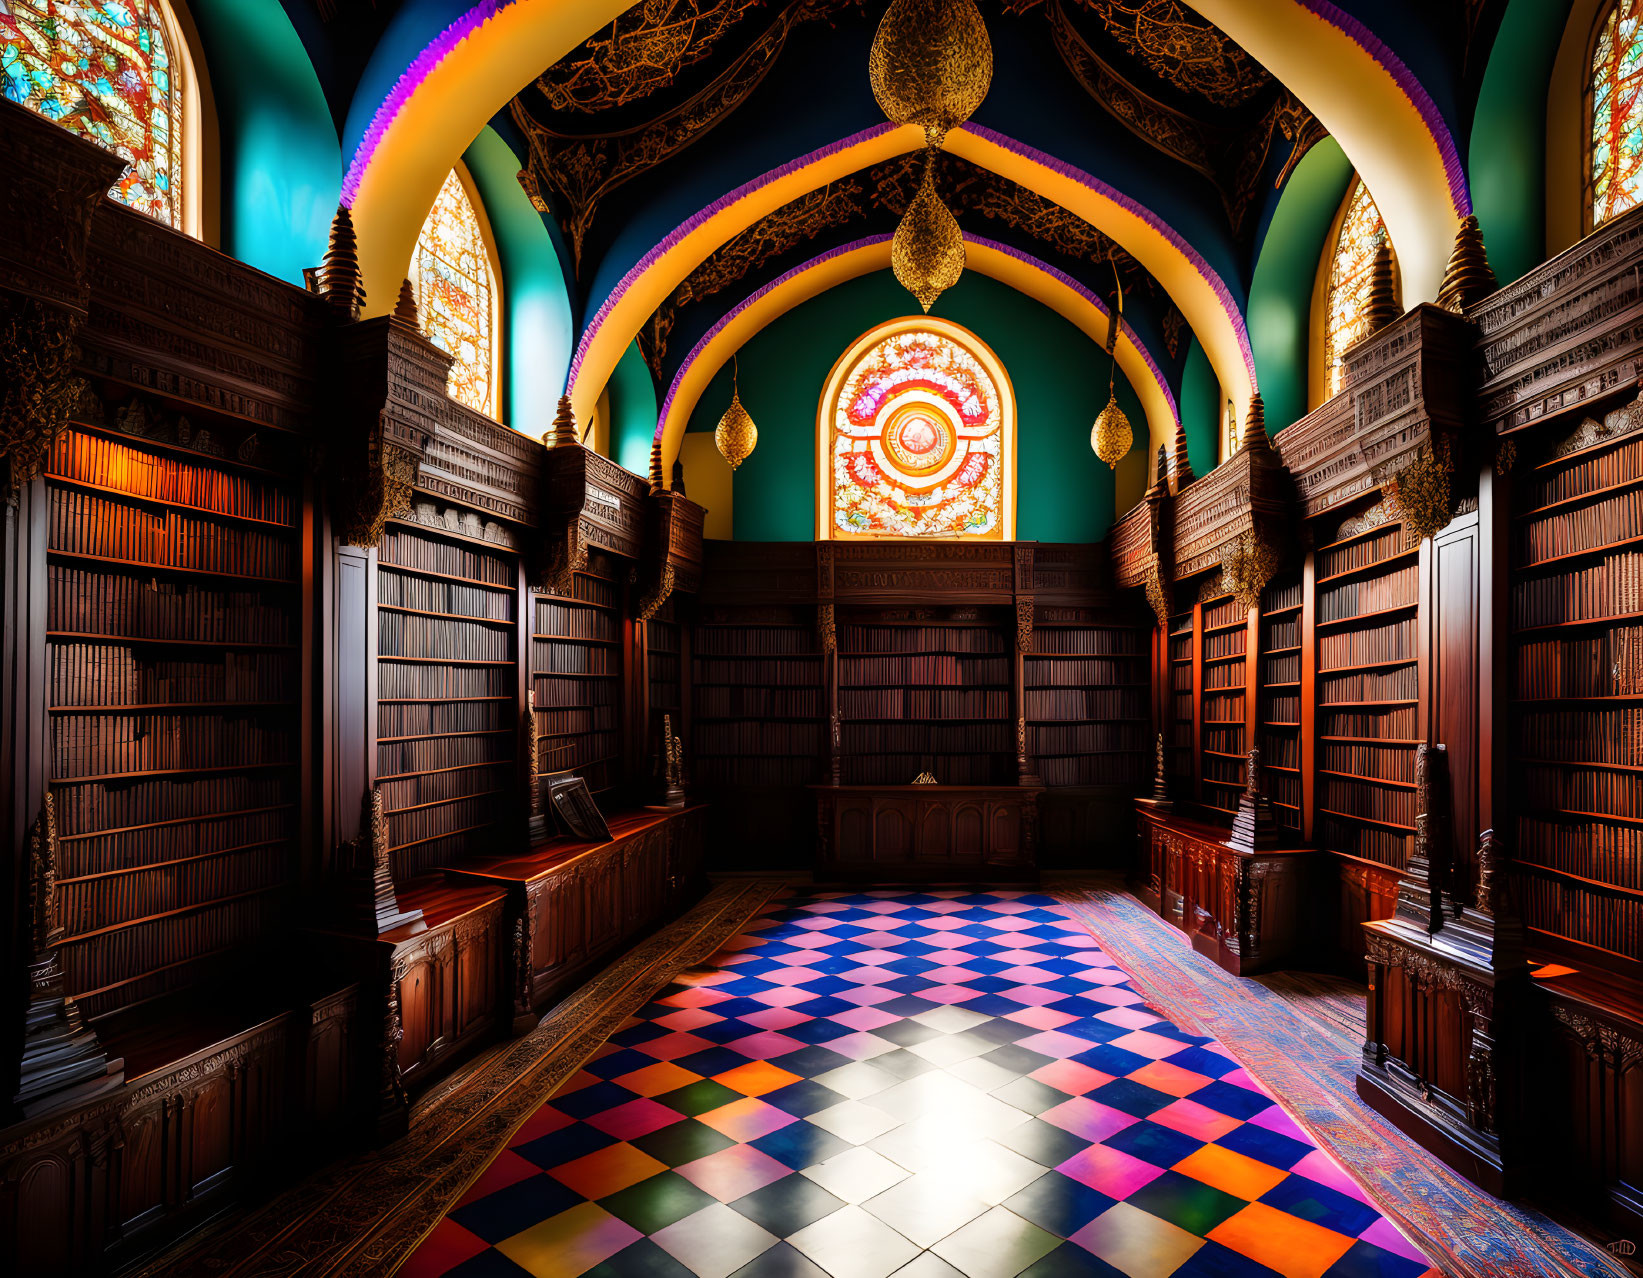 old monastery library takes pride in its colors